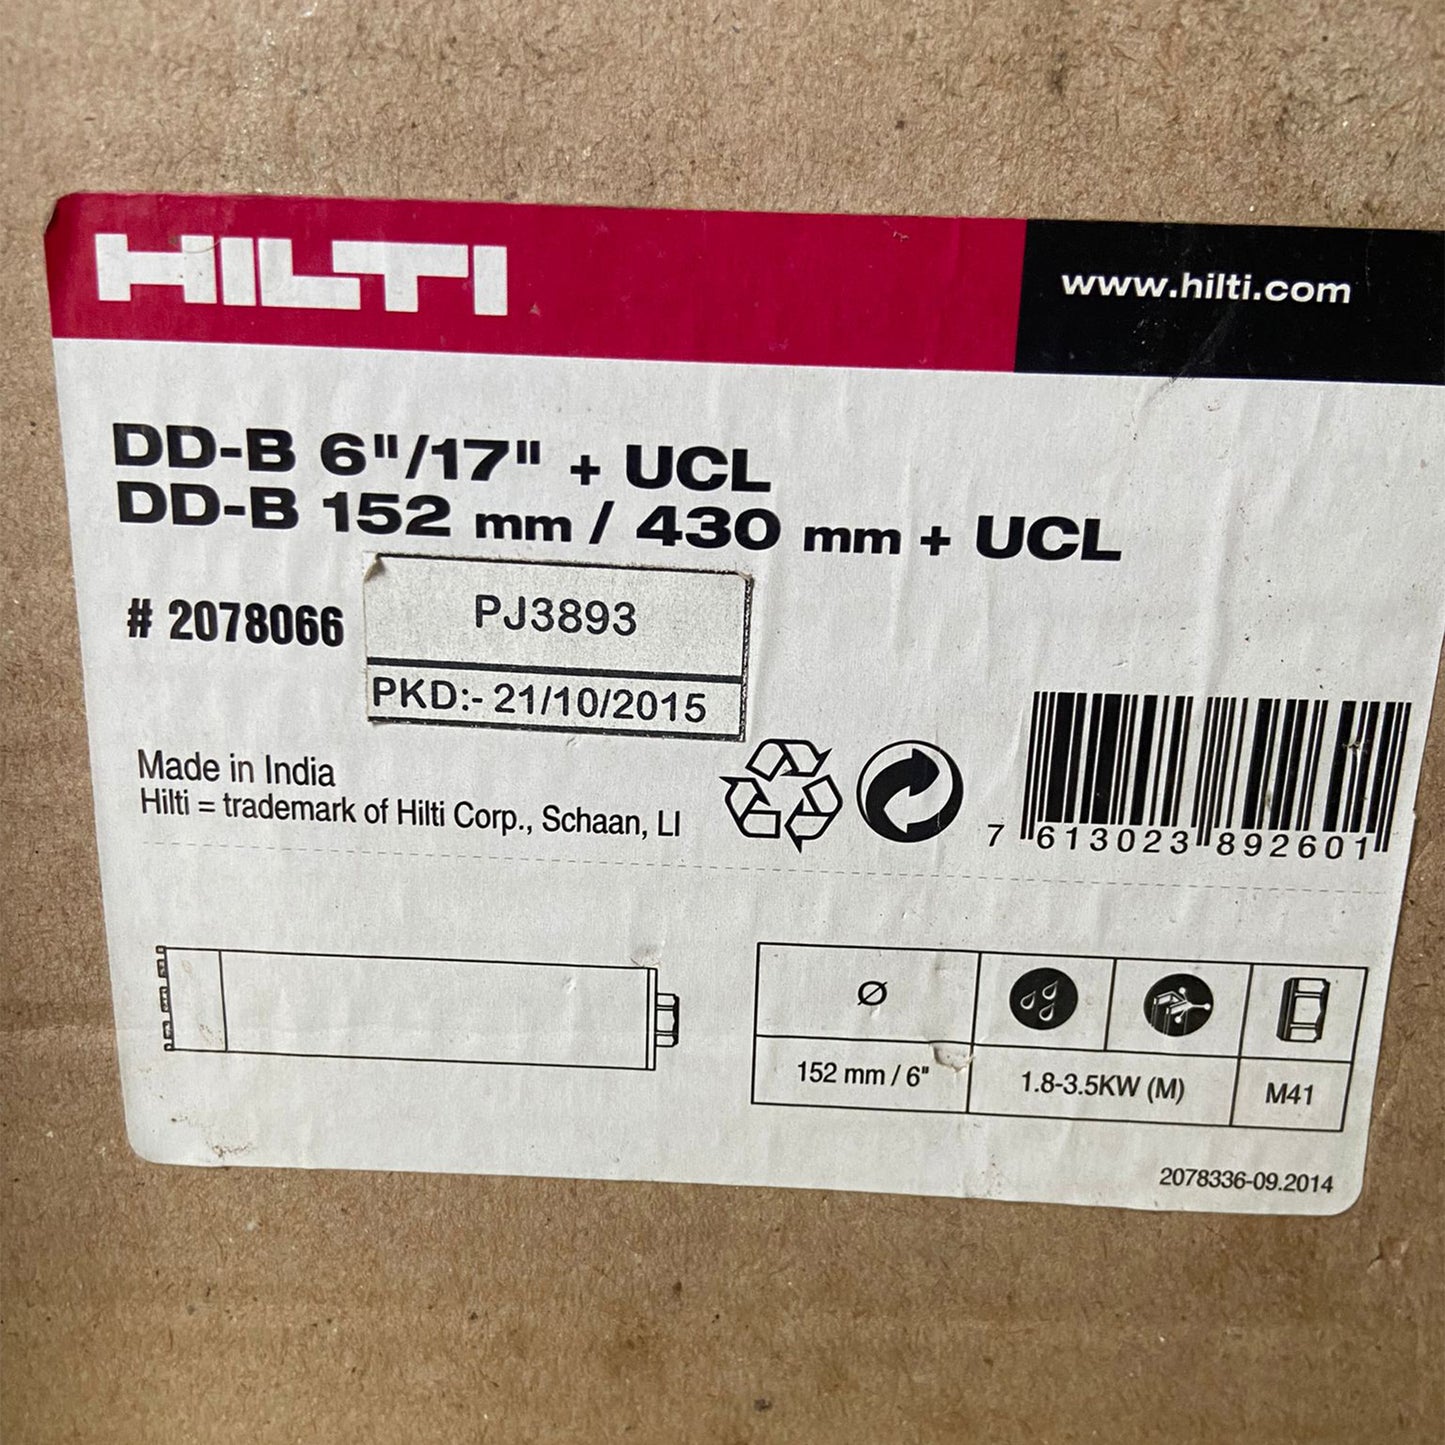 DD-B 6" to 17" Diamond Drill Bit Set with UCL - 152mm to 430mm - 2078066